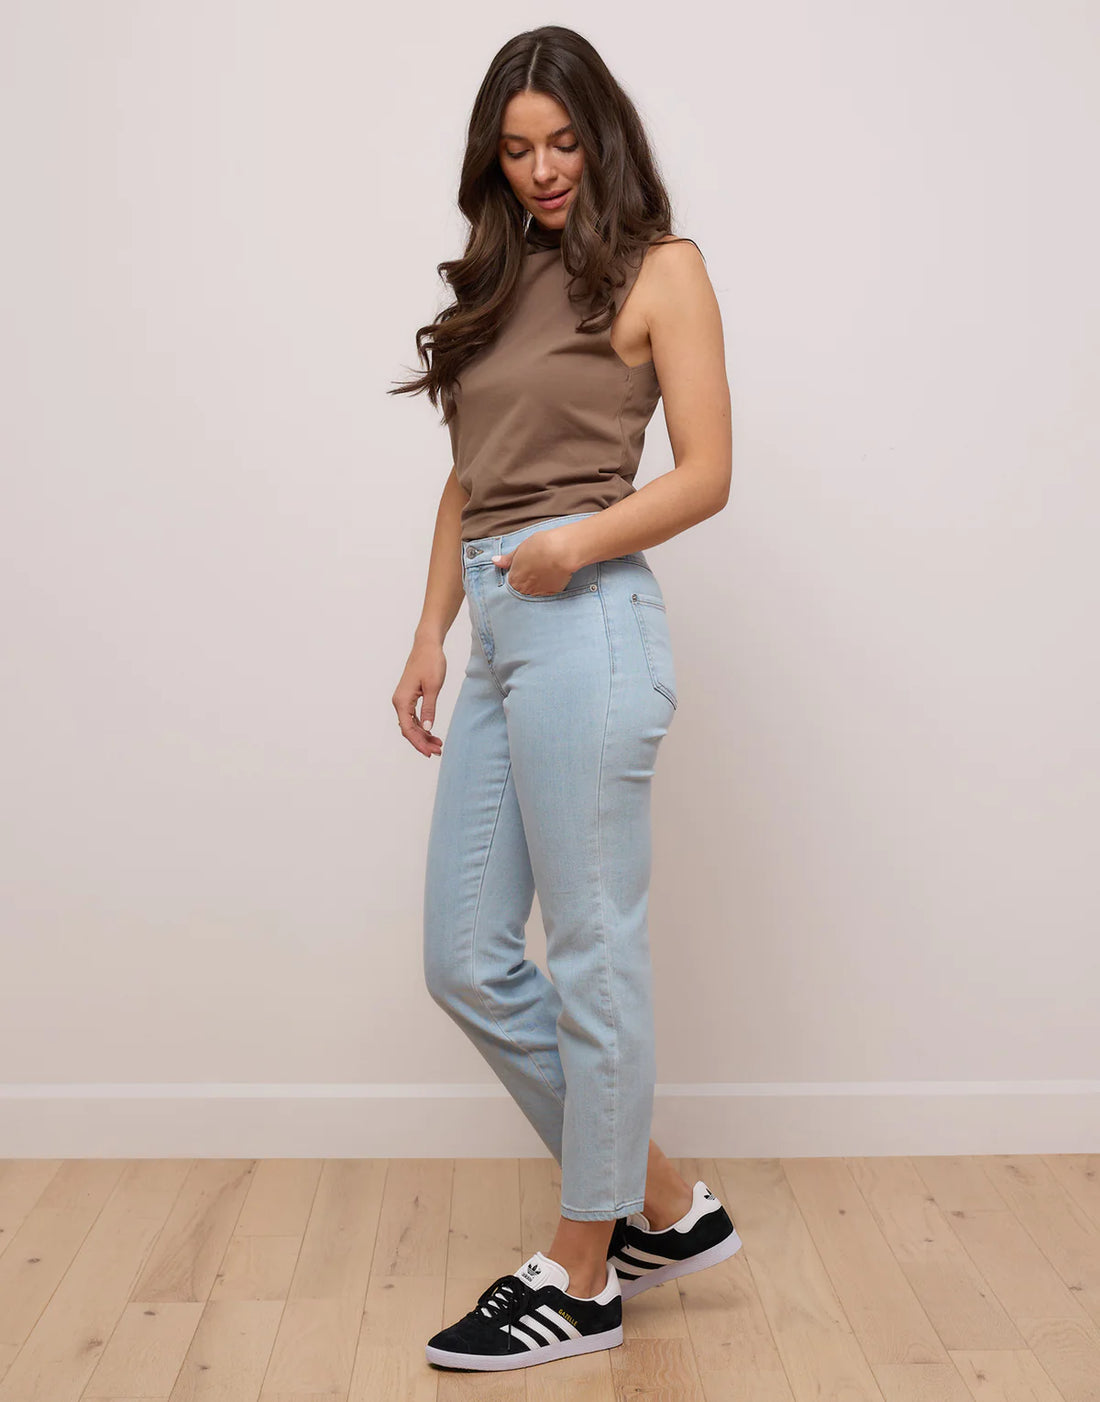 Jeans Emily Pure Yoga Jeans